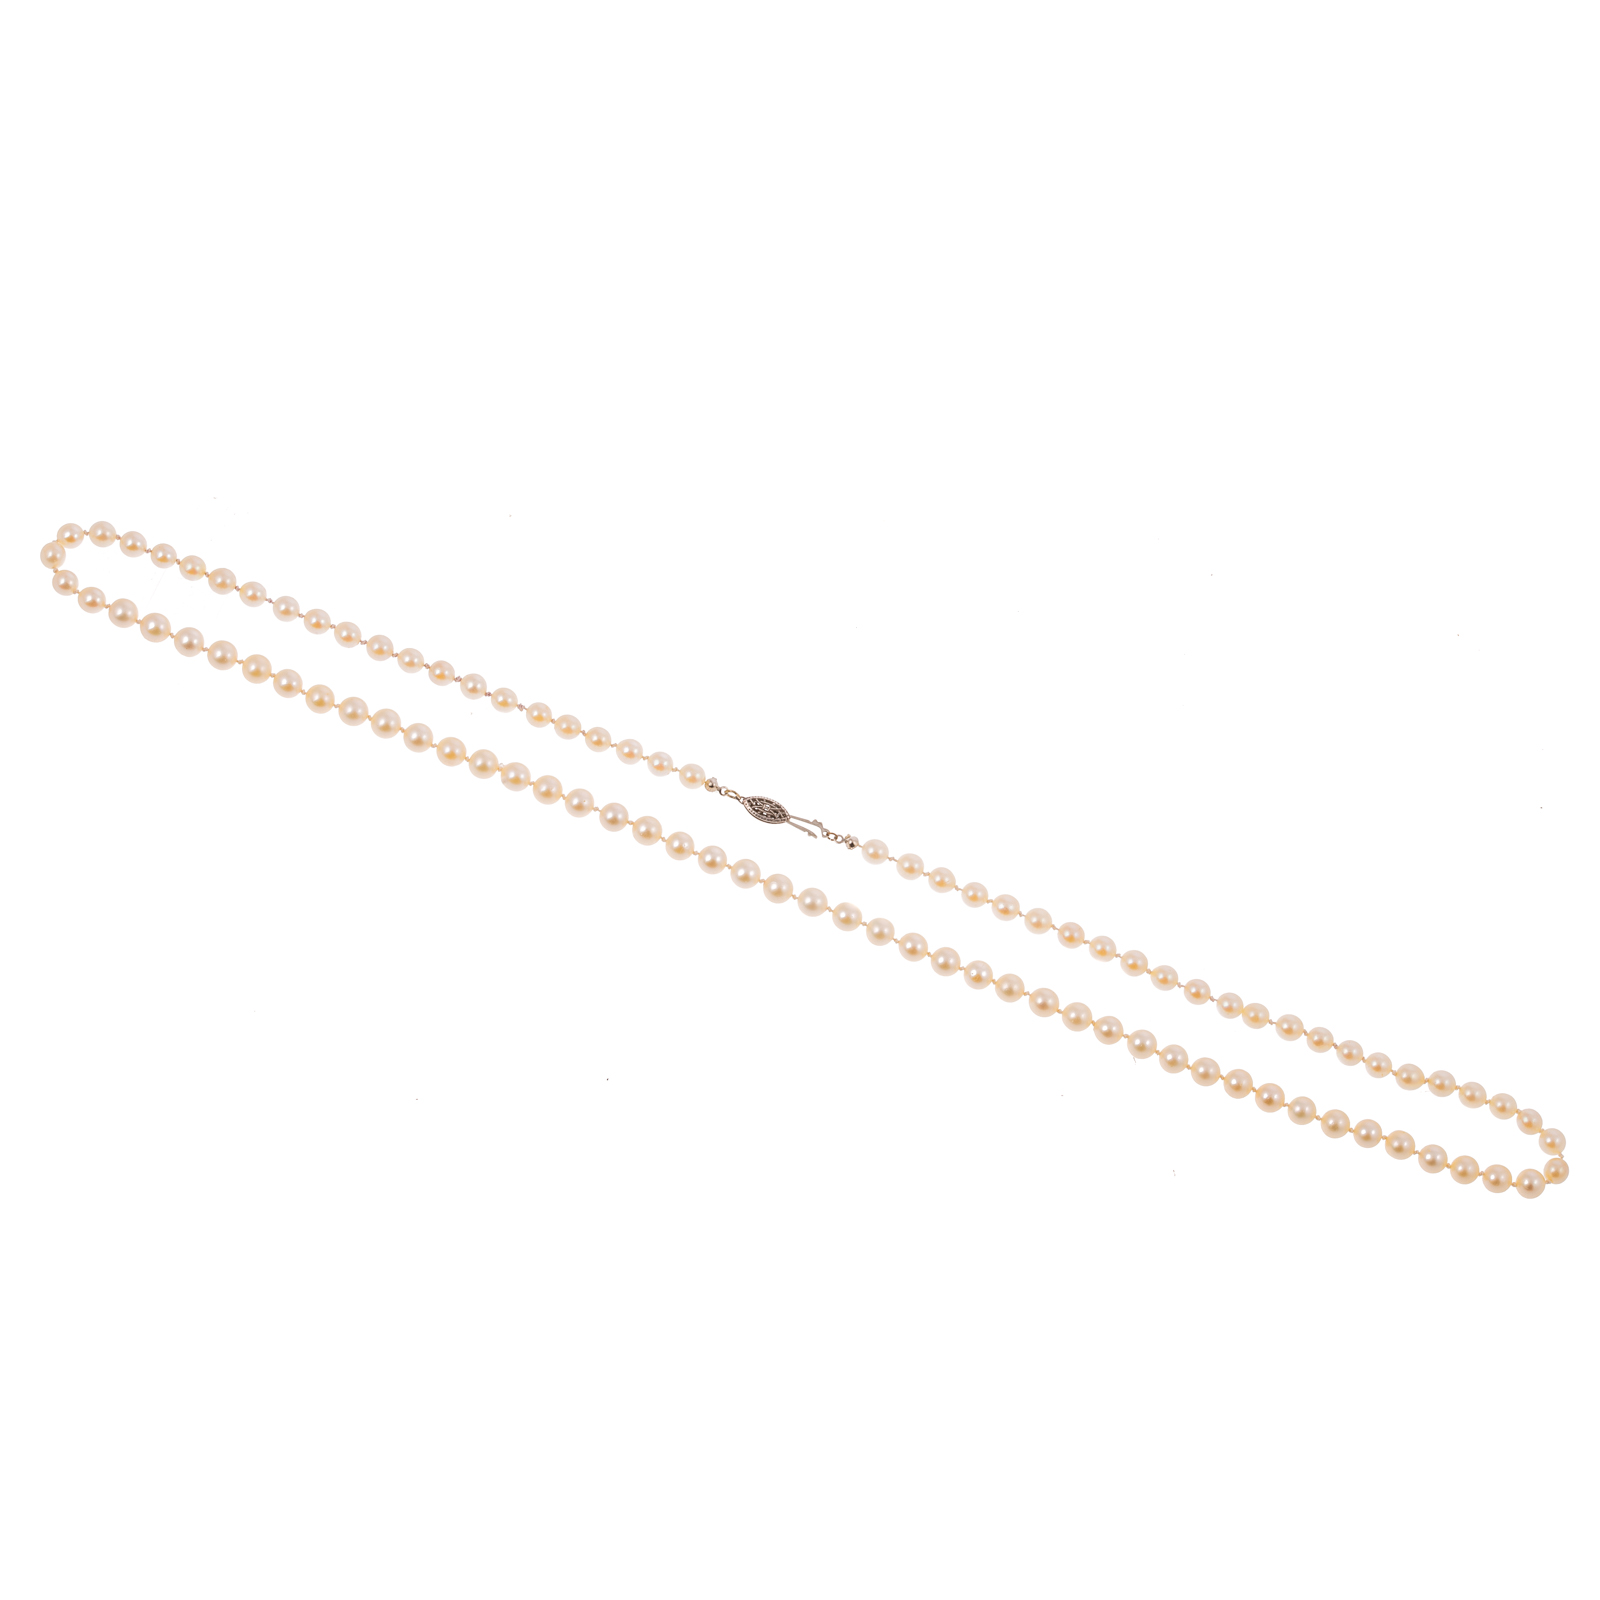 A LONG STRAND OF CULTURED PEARLS 287c41